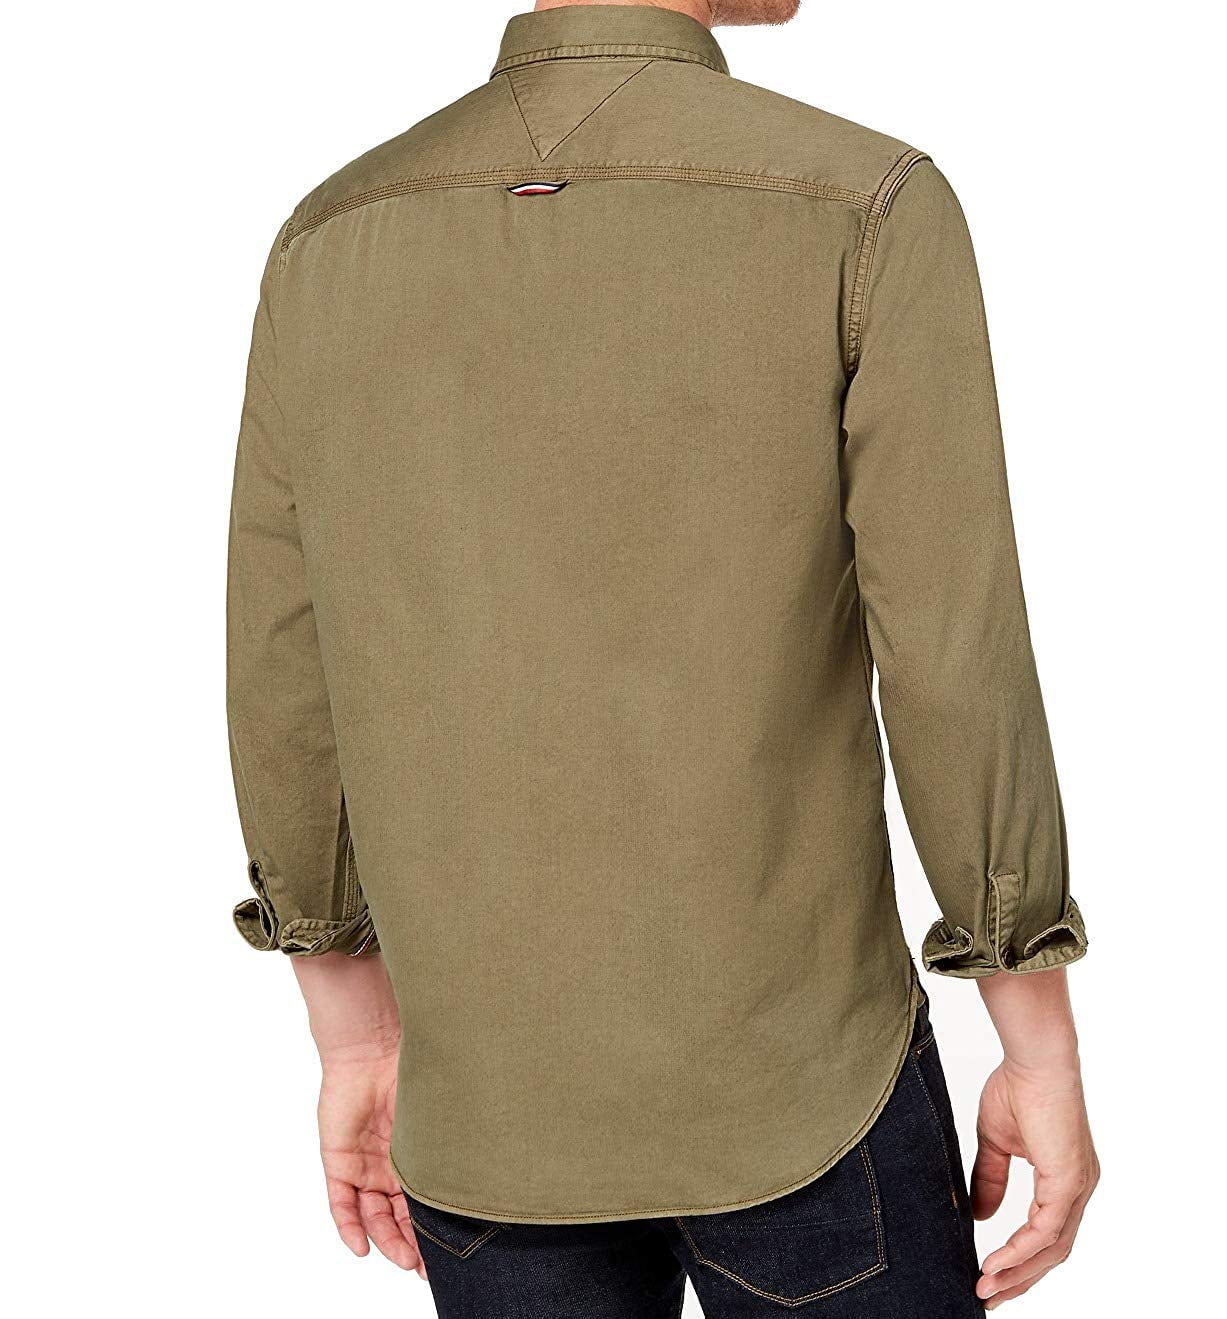 TOMMY HILFIGER Shirt Men’s Military Green Double Pocket Custom Fit Long Sleeve